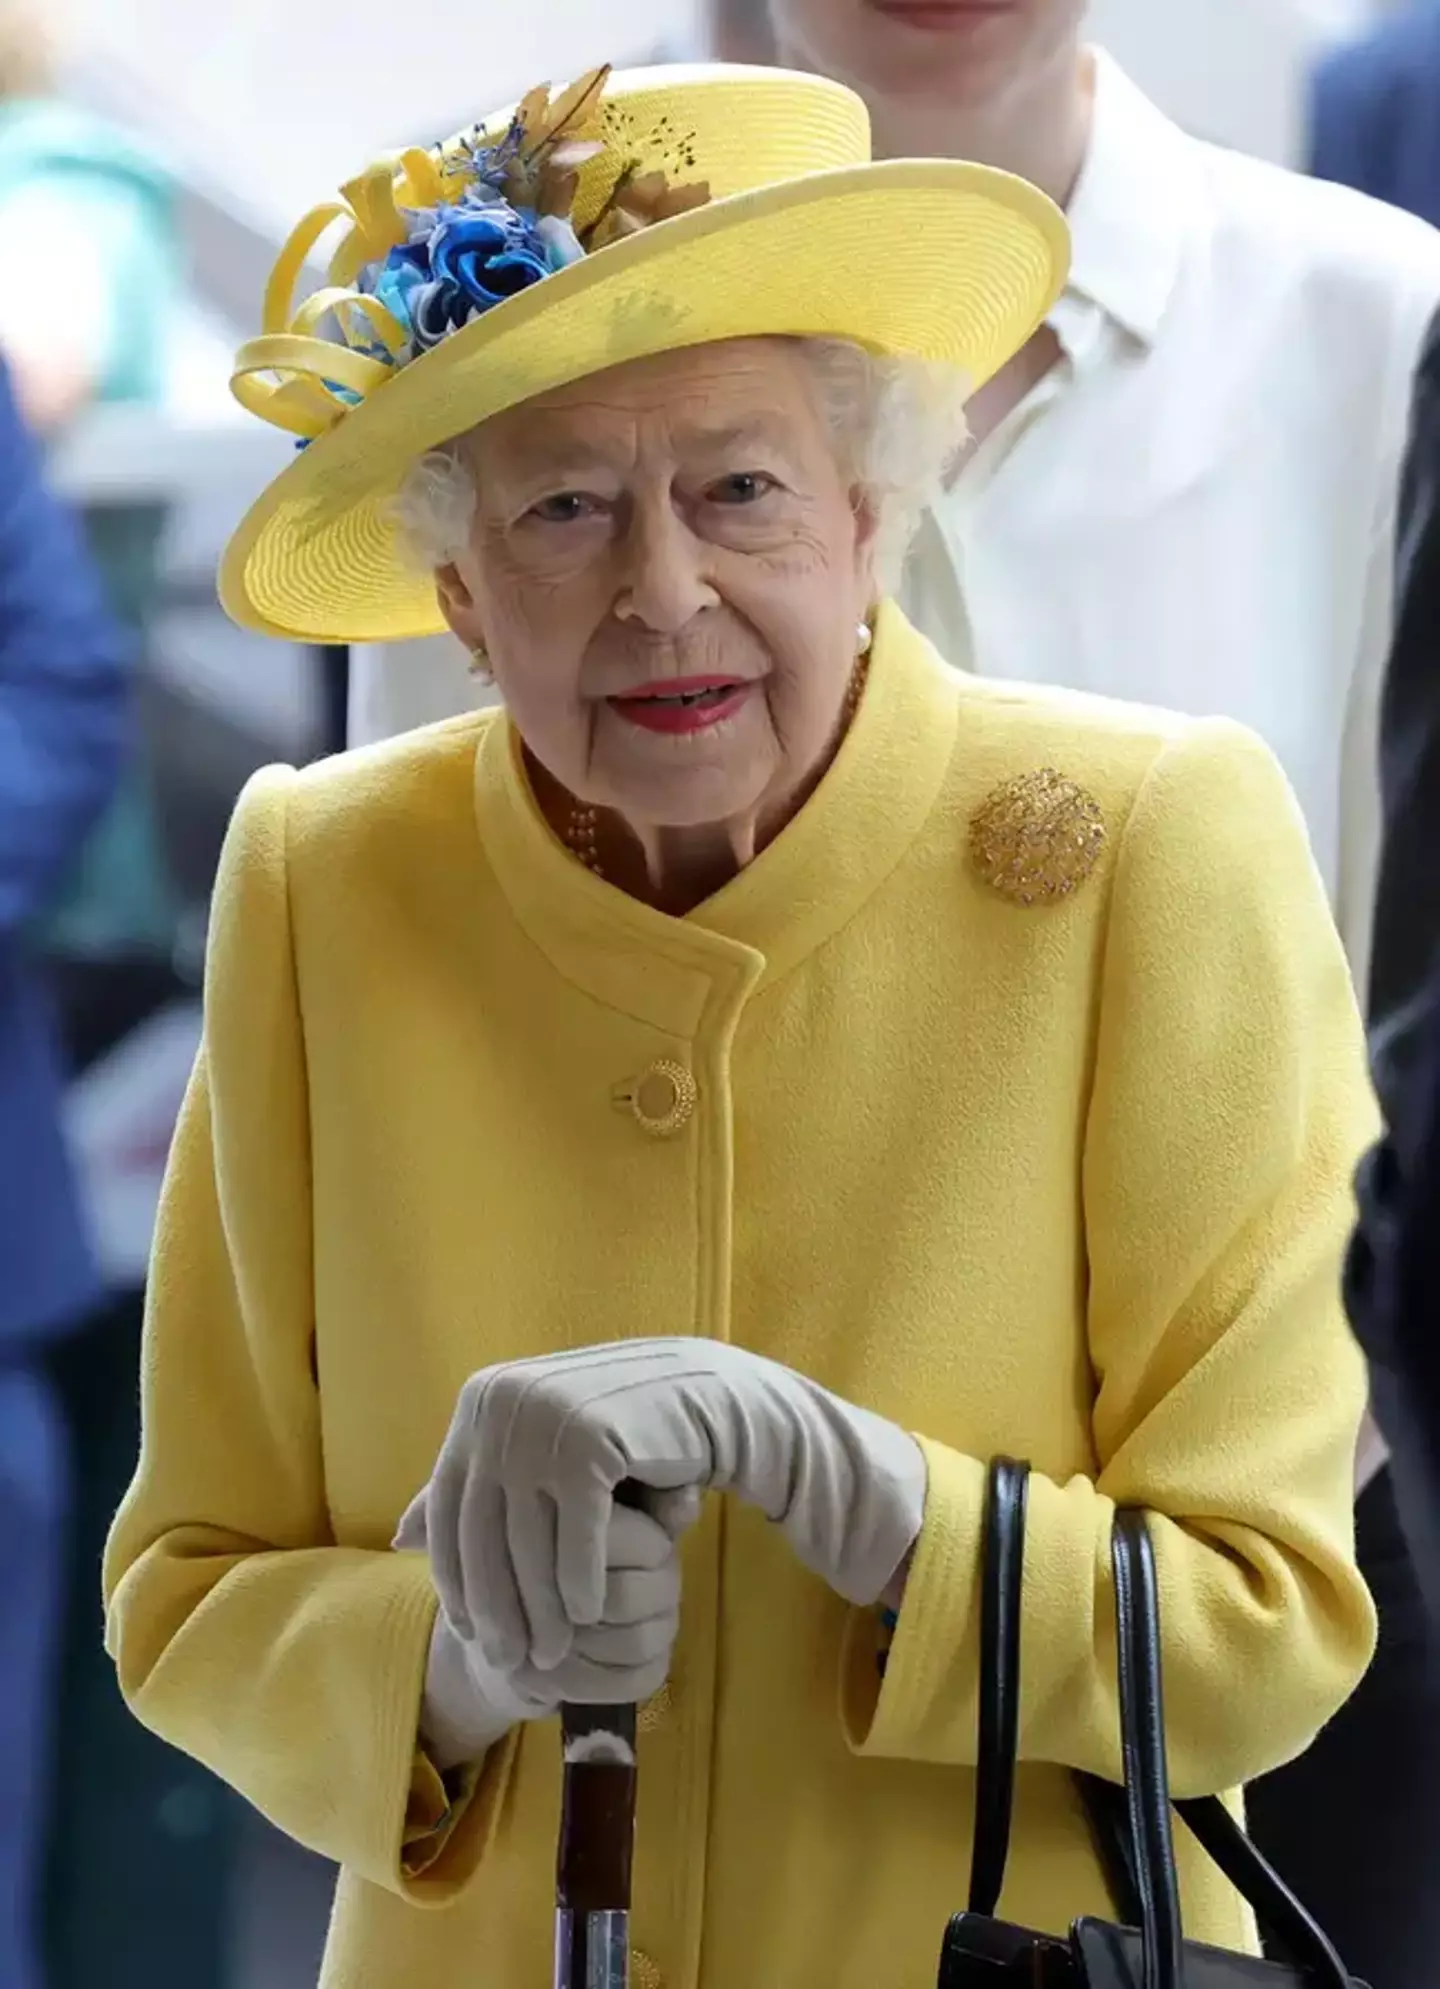 Queen Elizabeth II passed away at the age of 96 on 8 September.